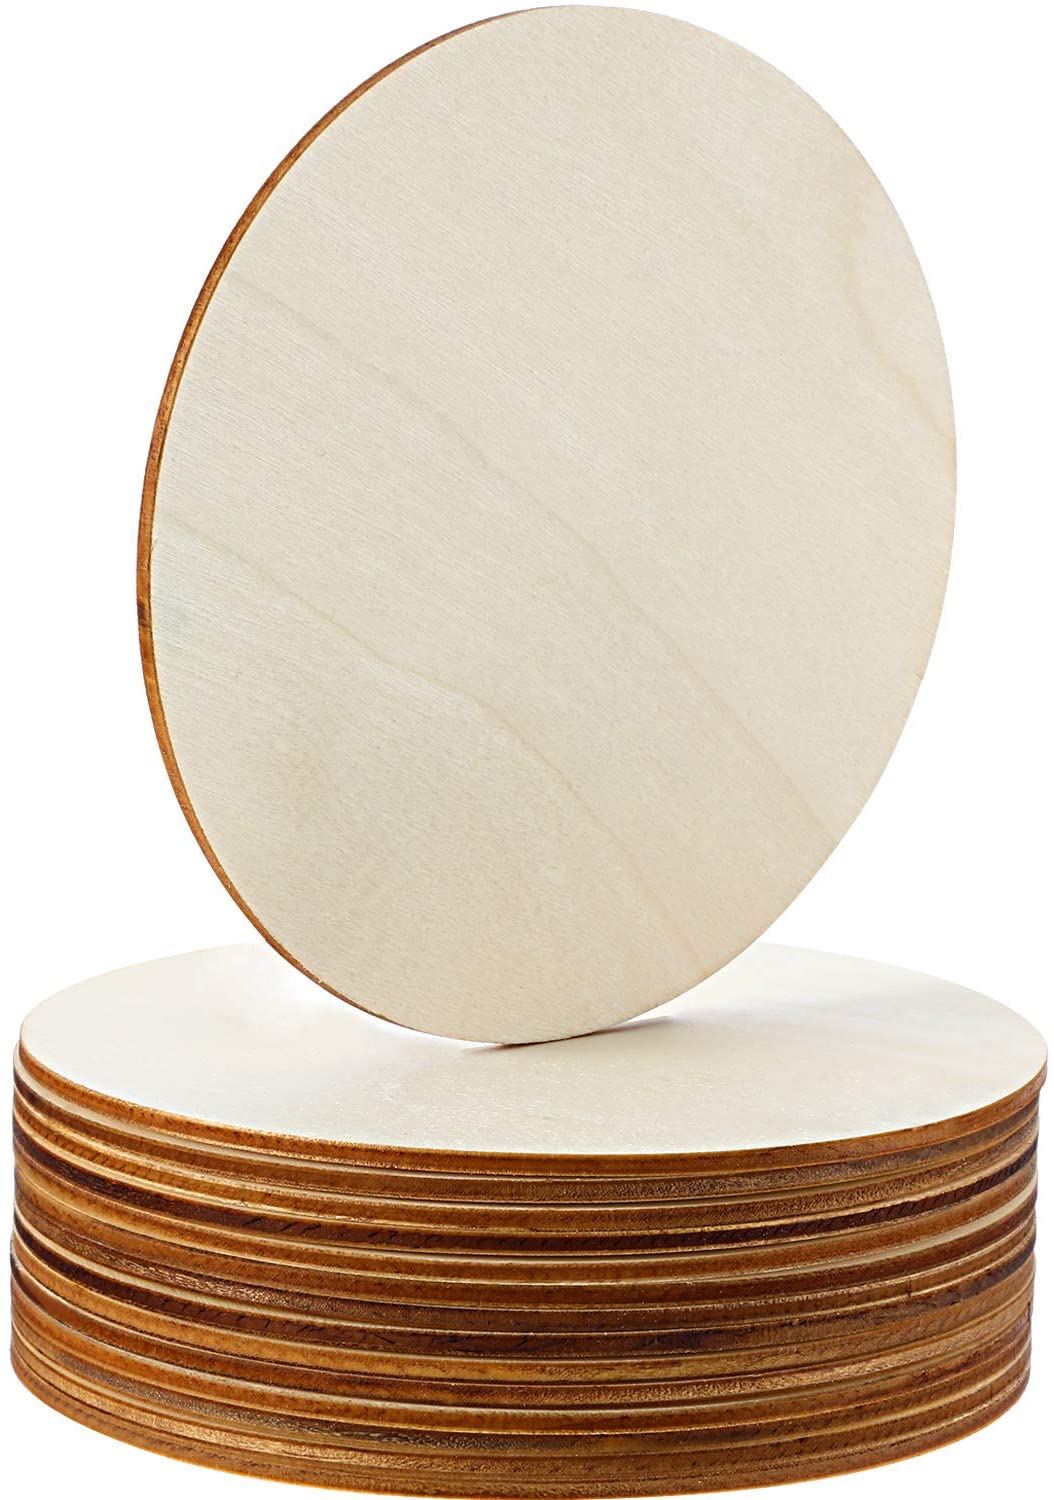 15 PCS - Unfinished Wood Circle Round Wood Pieces Blank Round Ornaments Wooden Cutouts for DIY Craft Project. - e4cents